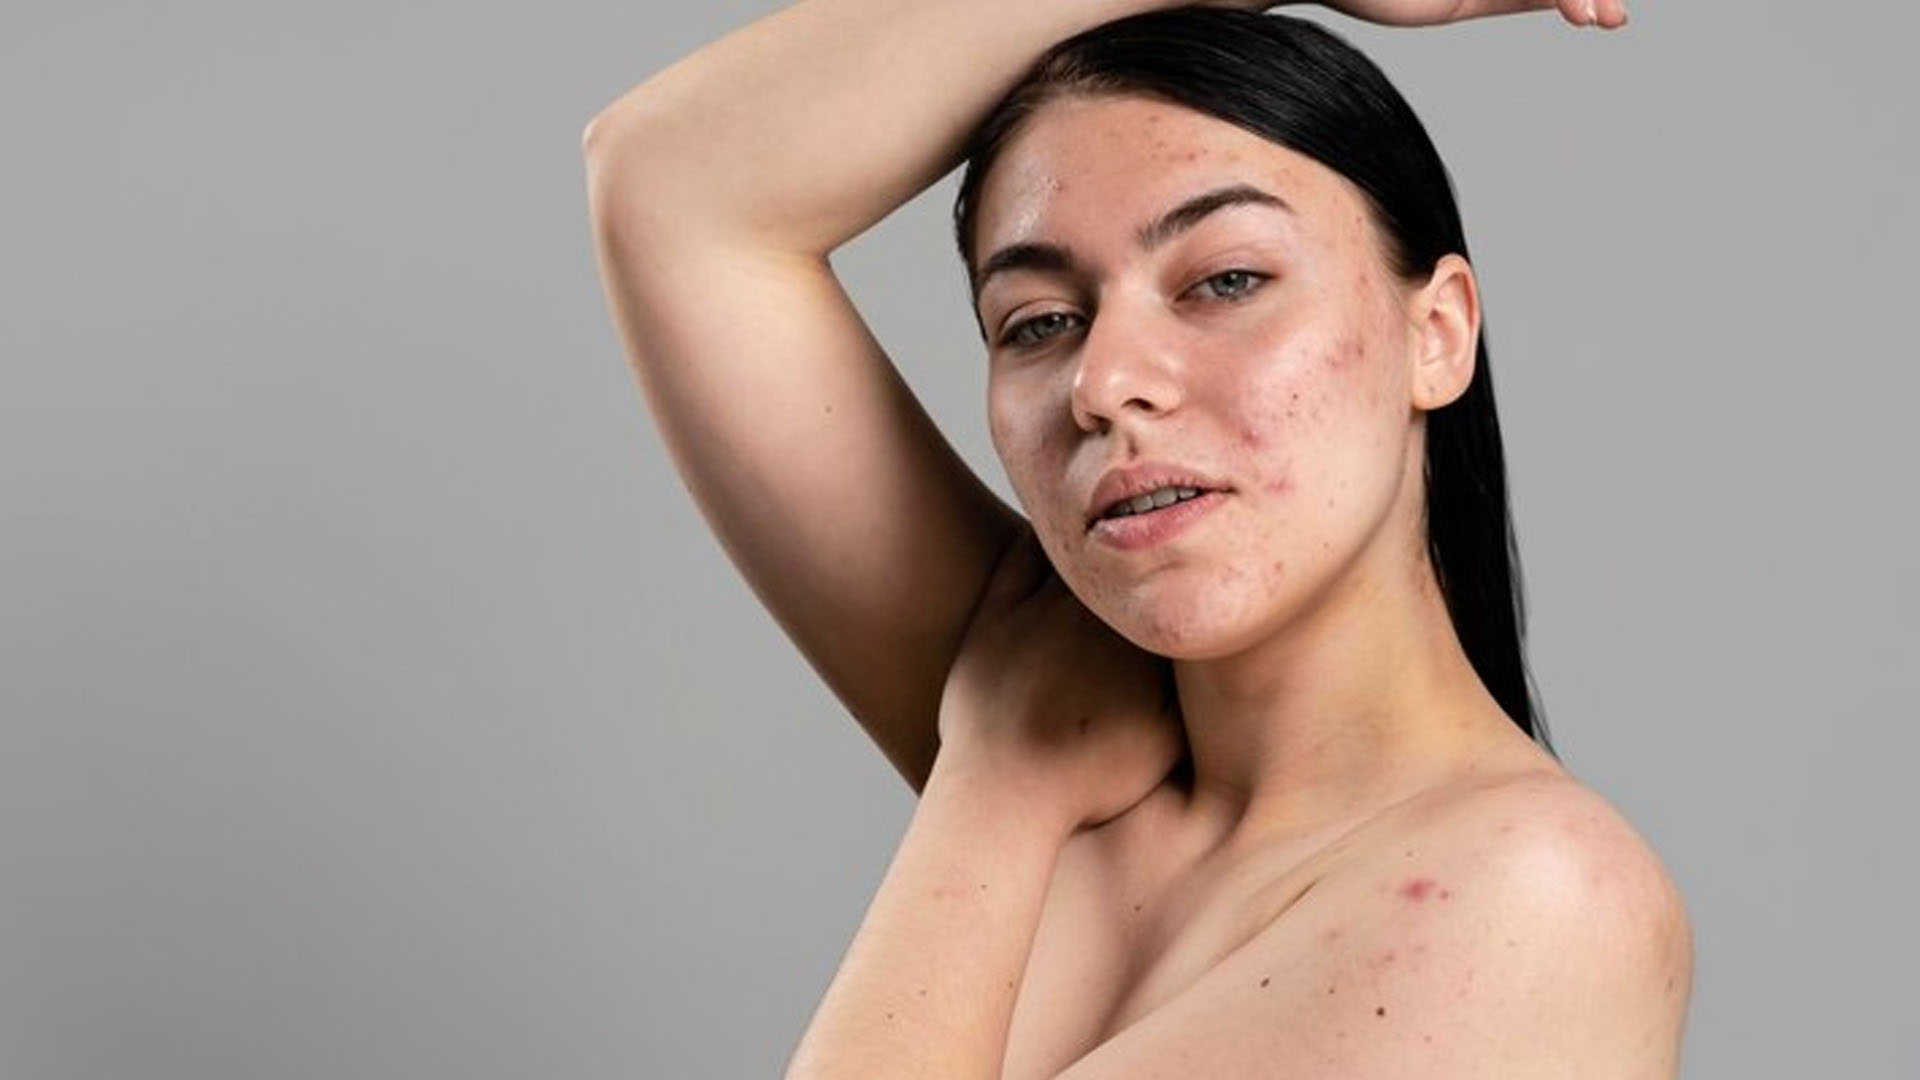 What are the Home Remedies for Body Acne?